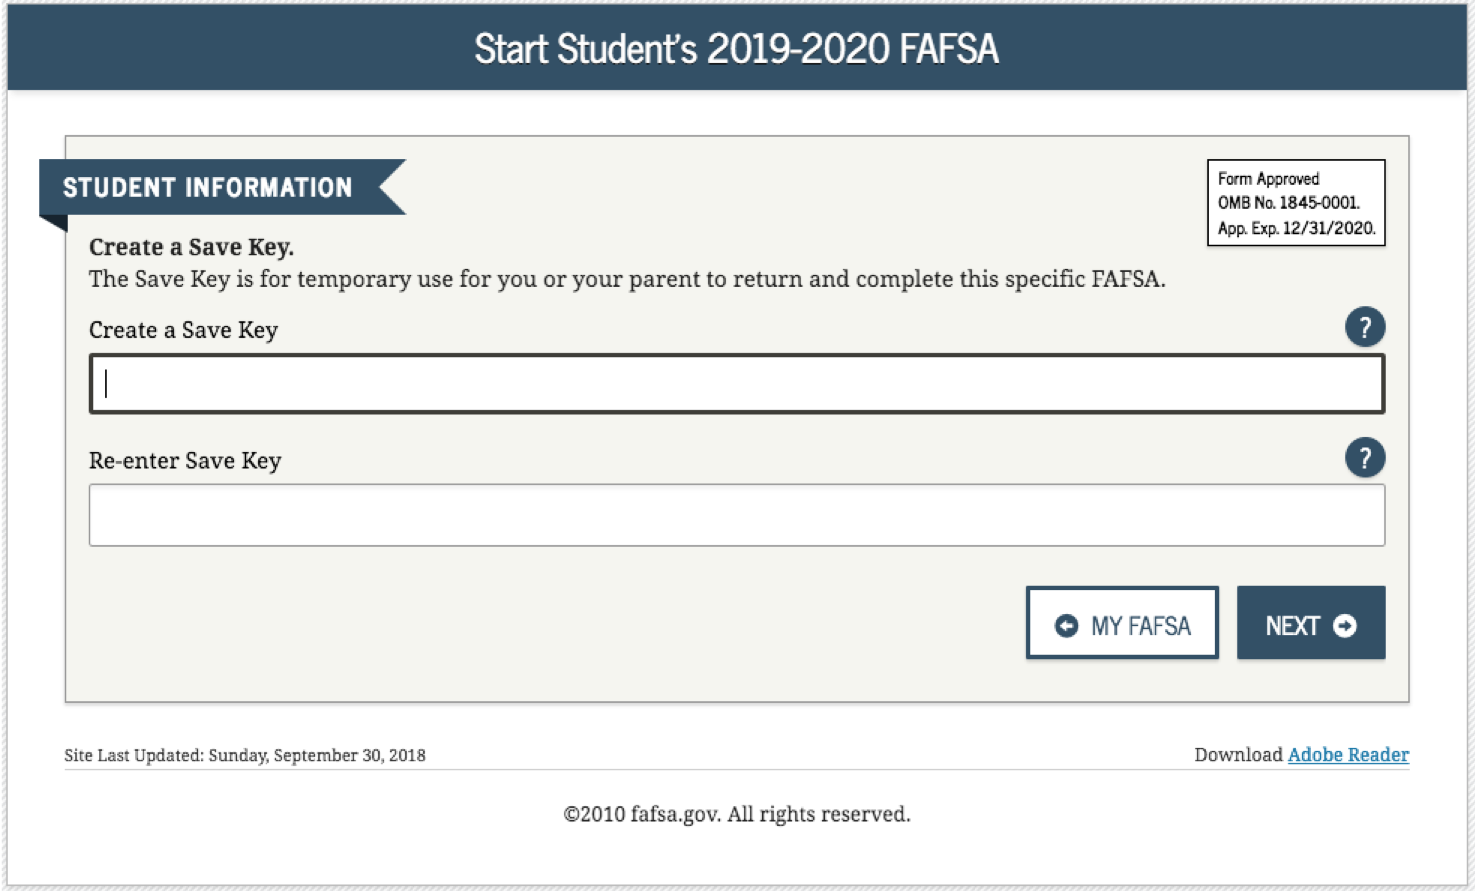 how to complete the 2019-2020 fafsa application